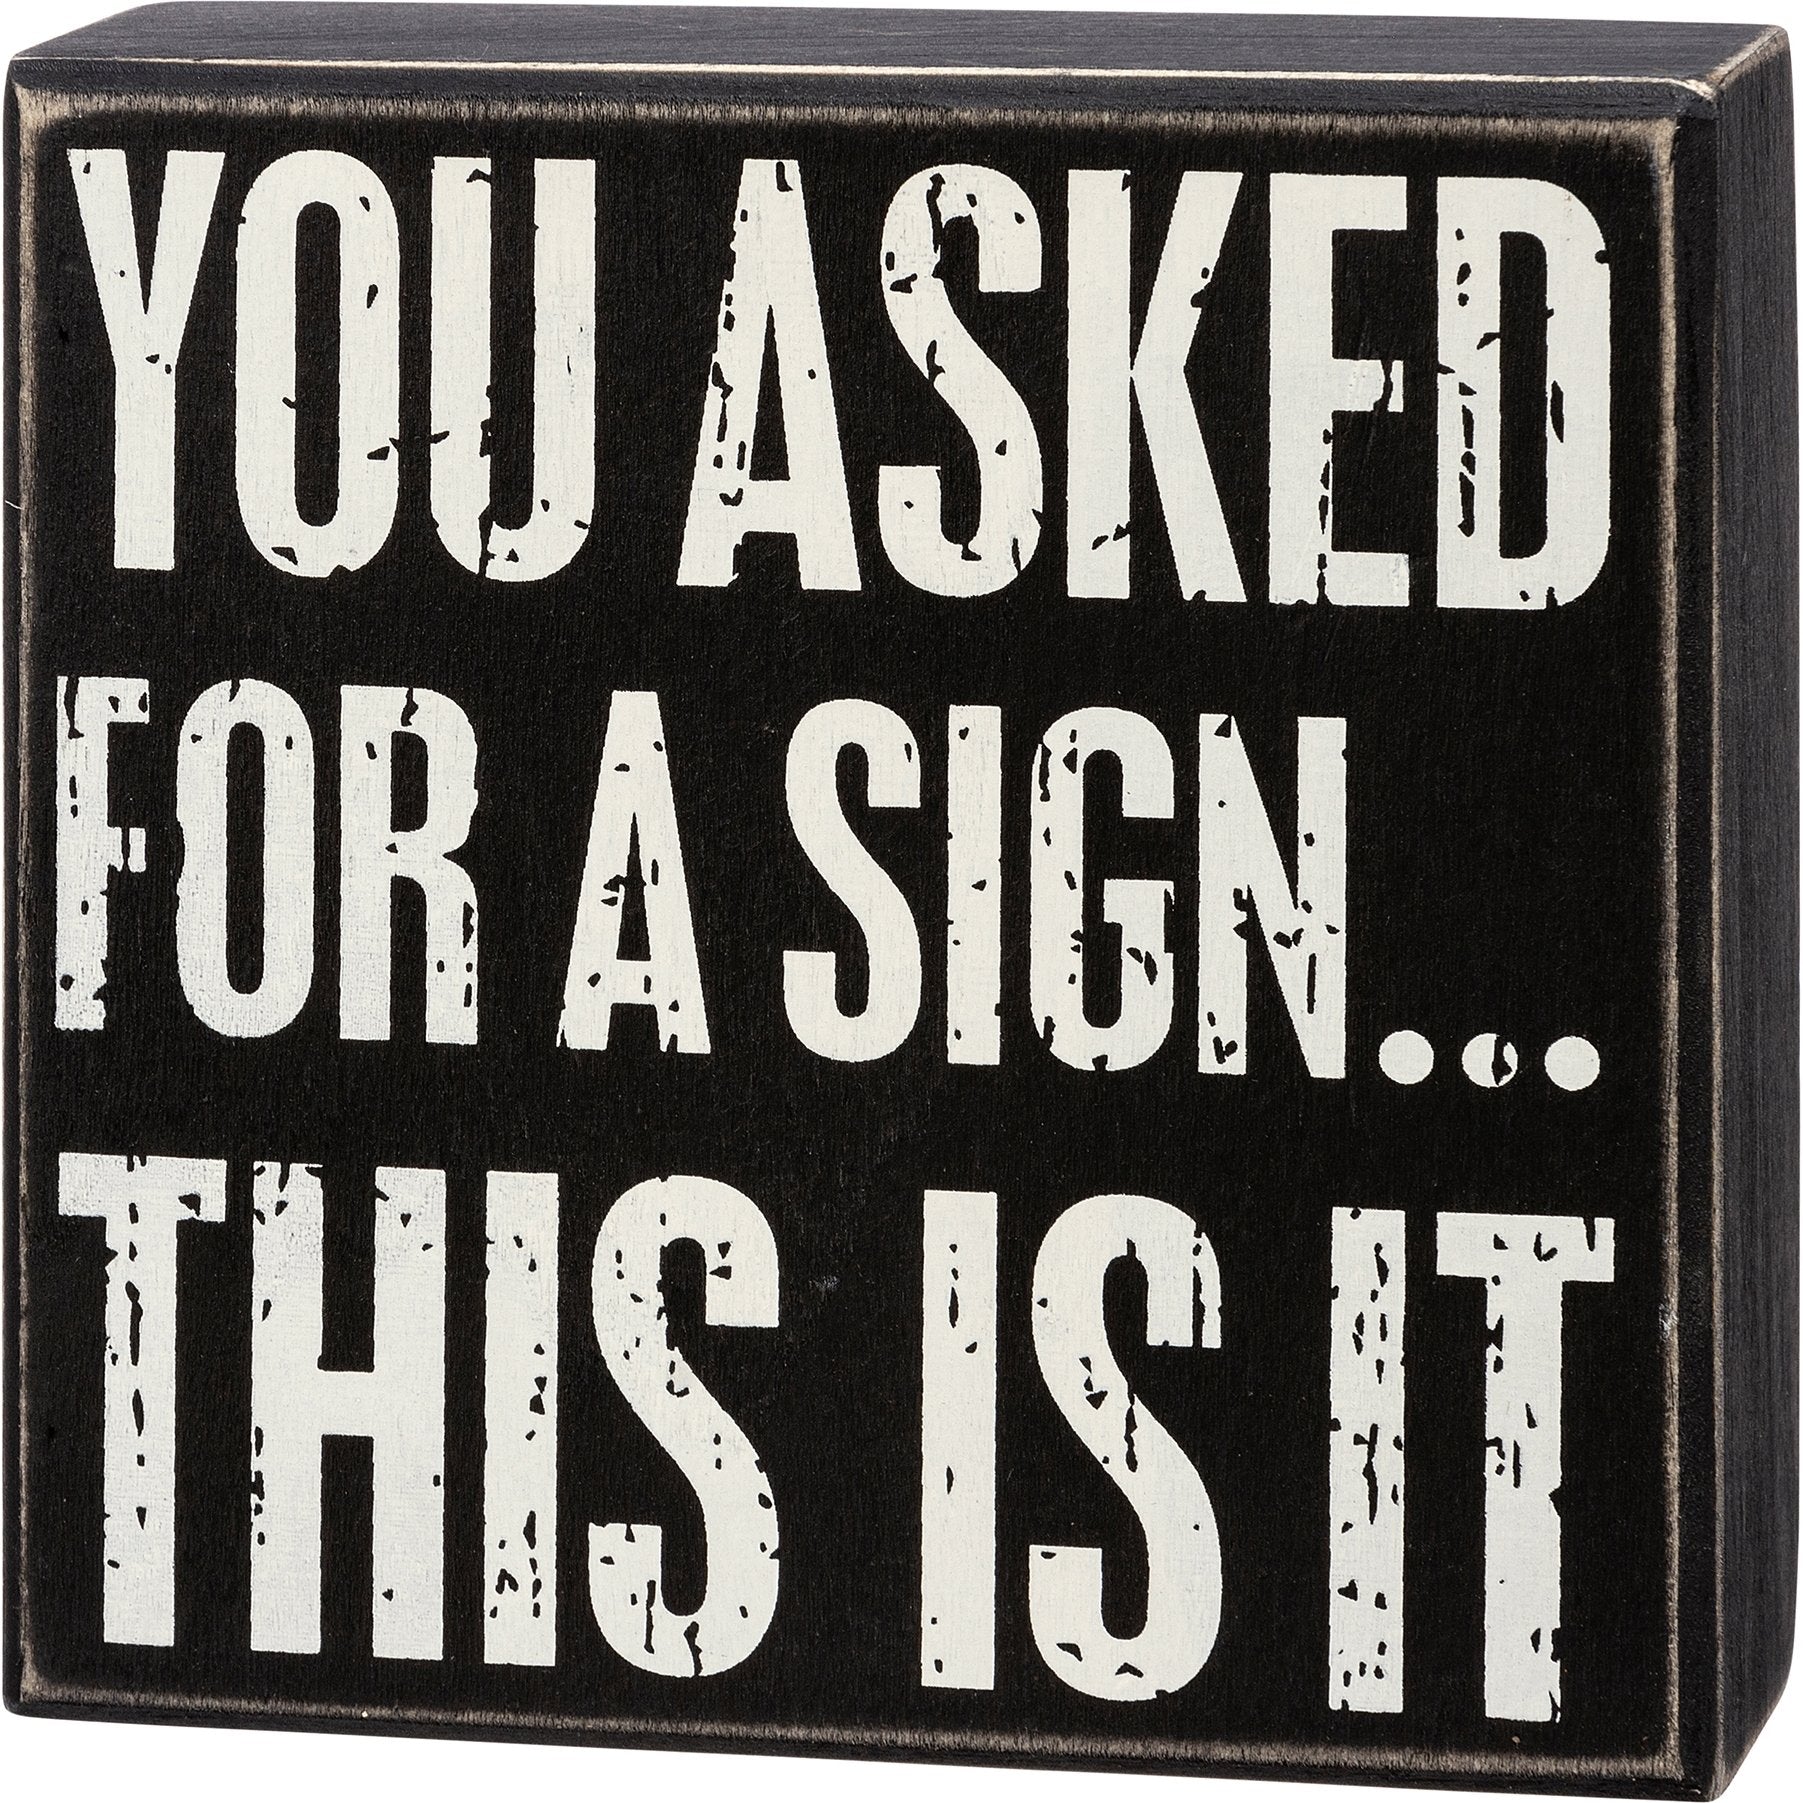 You Asked For A Sign This Is It Box Sign | Wood | Black with White Lettering